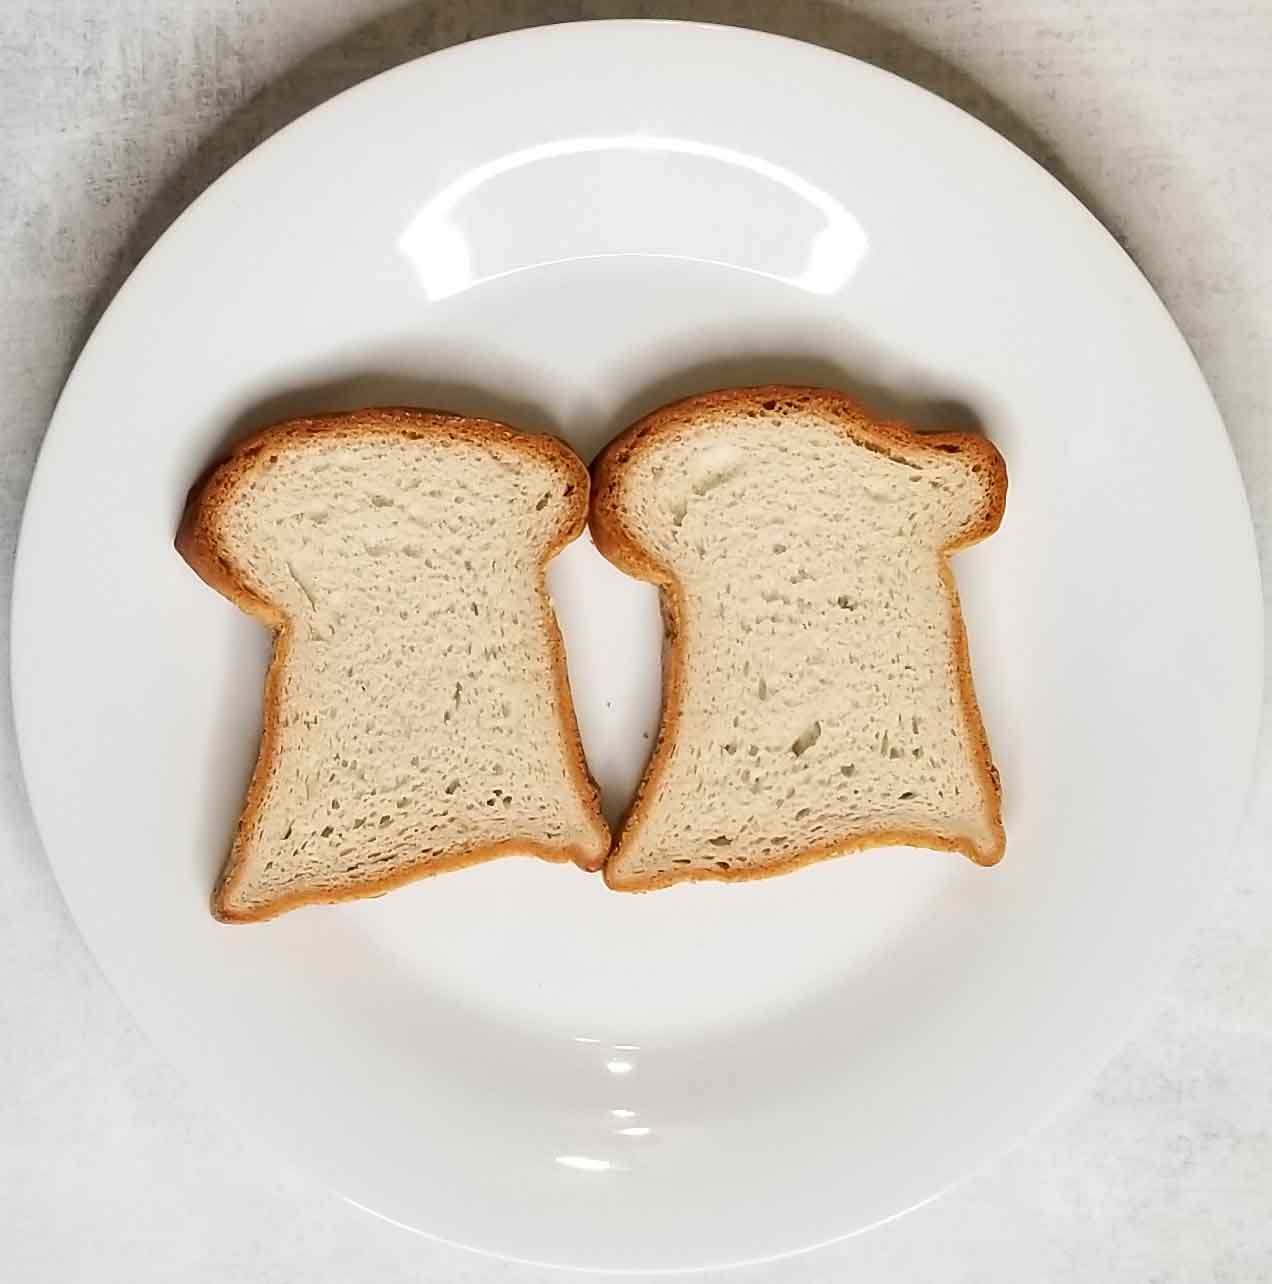 two pieces of gluten free bread on plate